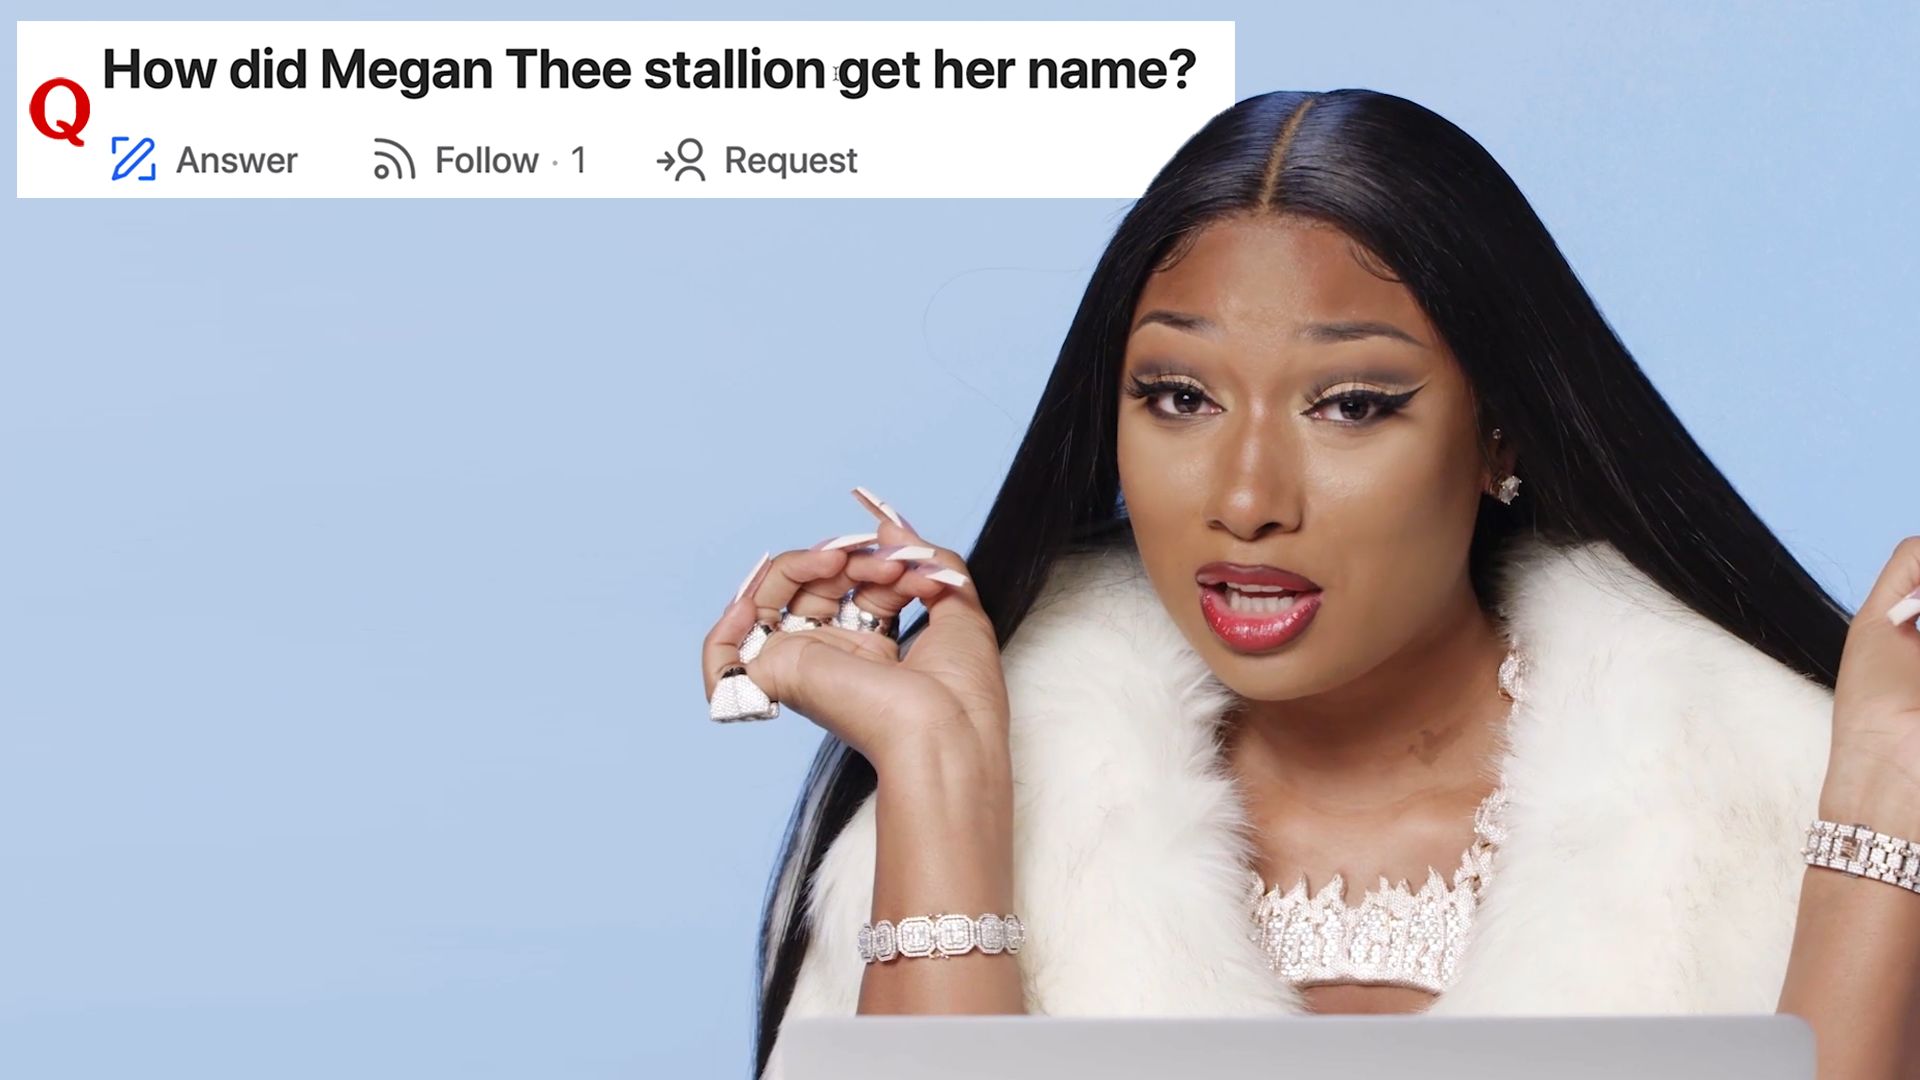 What are some of Cardi B's best hairstyles? - Quora